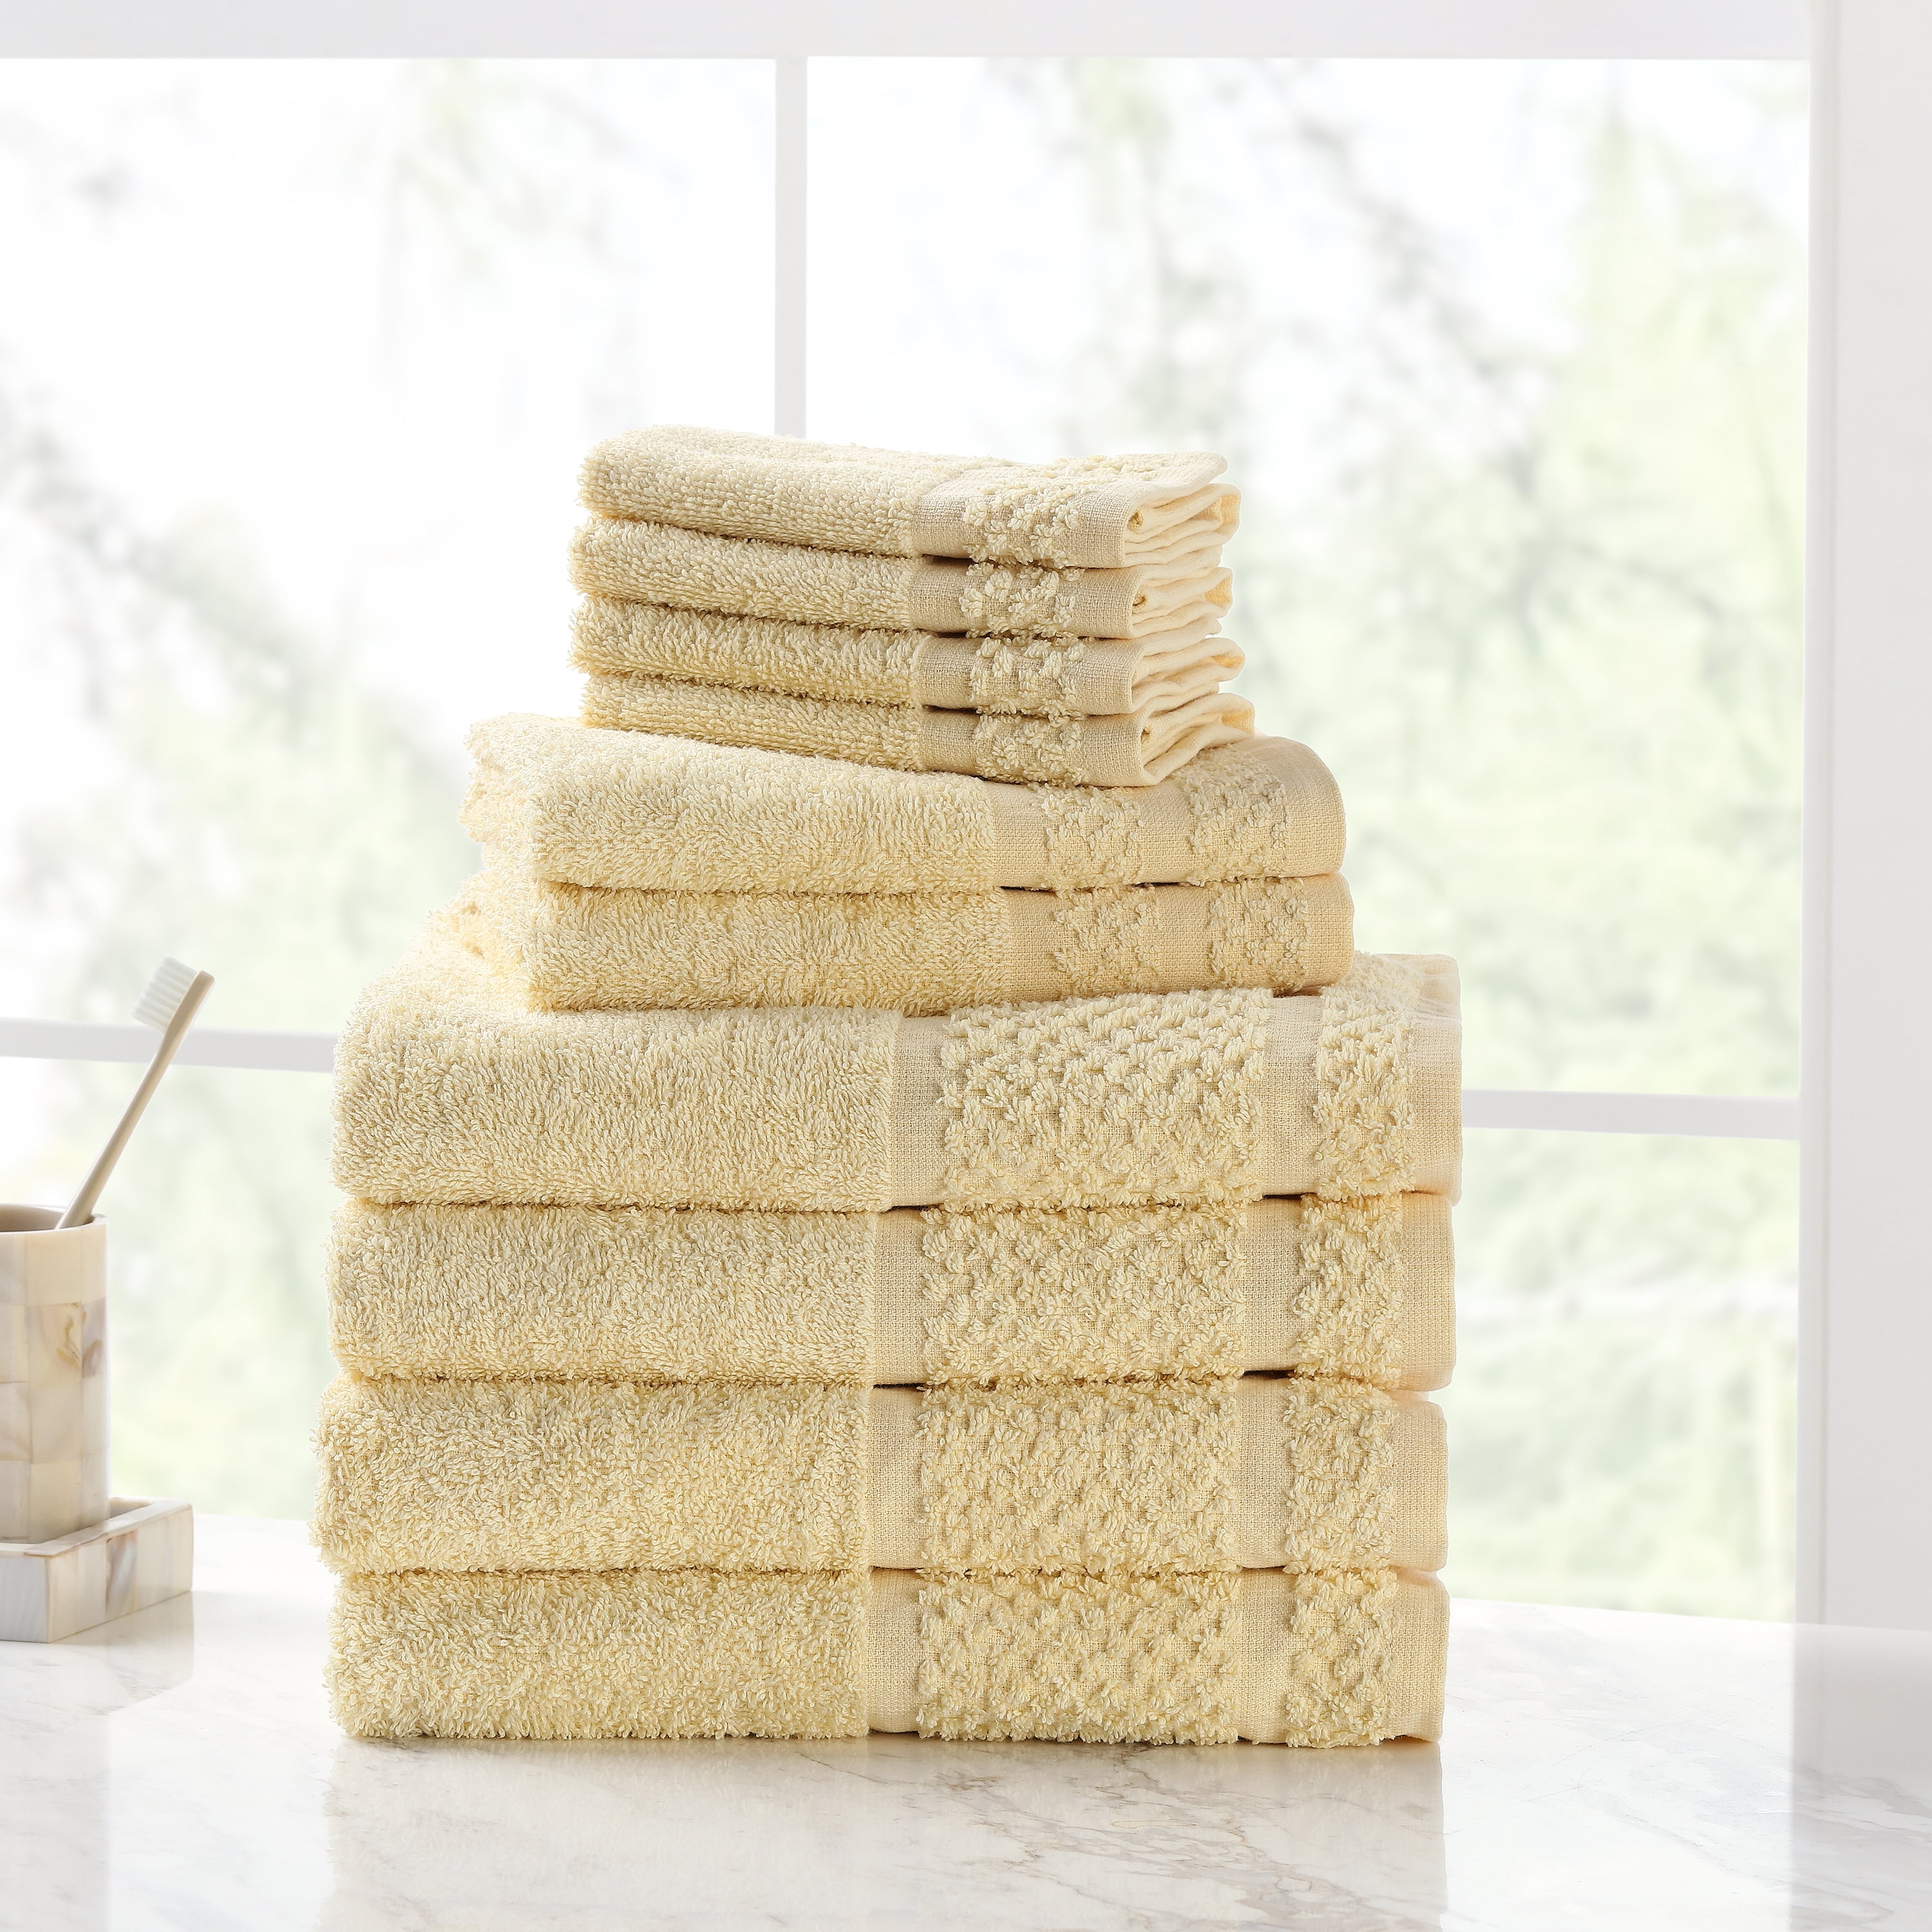 Details about   Mainstays Value 10-Pcs Cotton Towel Set with Upgraded Softness&Durability,White 